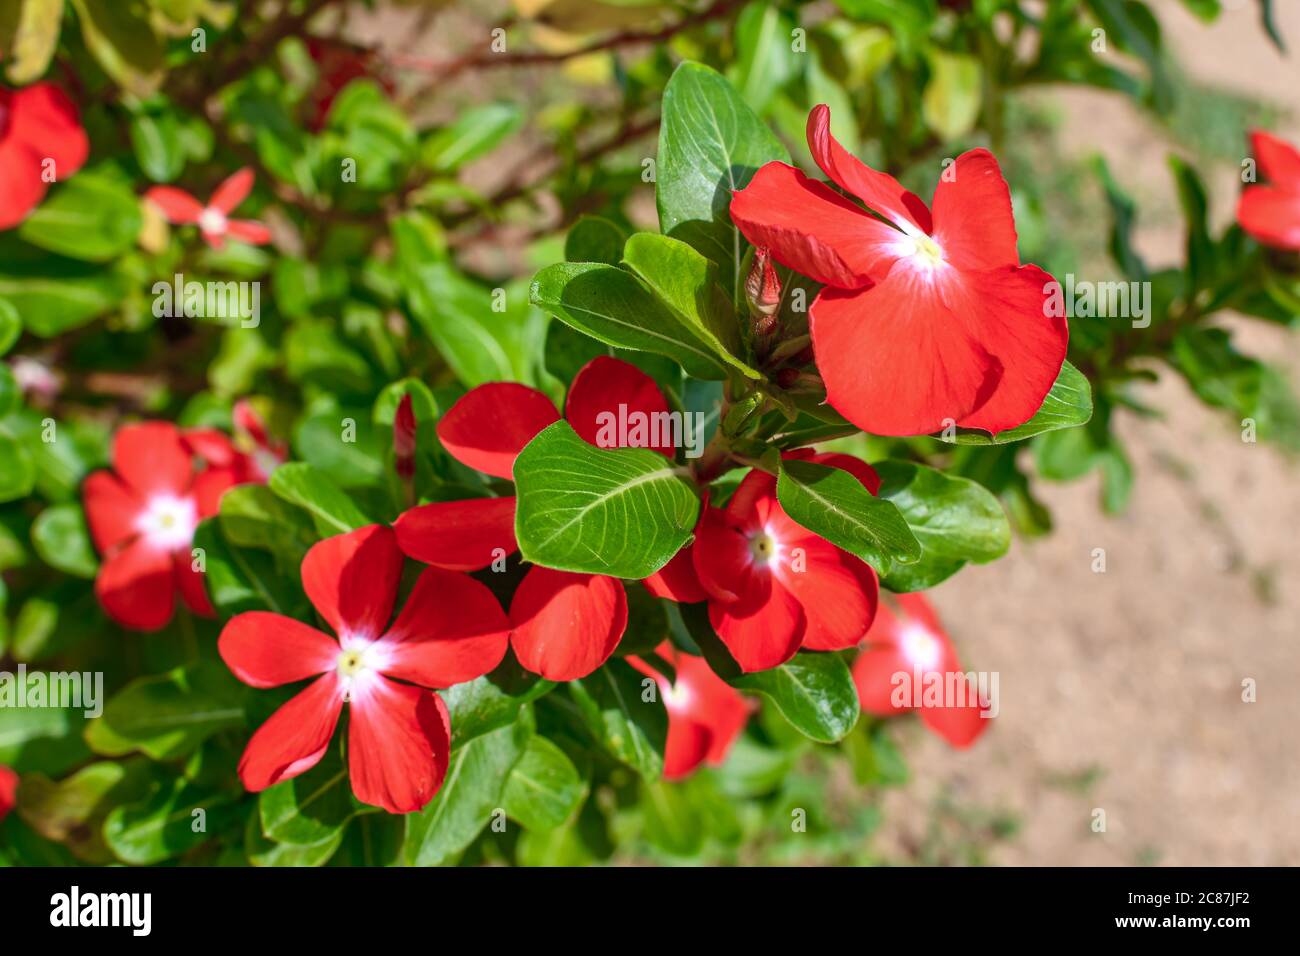 Red Tecoma Flowers With Green Leaves & Branches On Tree. 03 Stock Photo